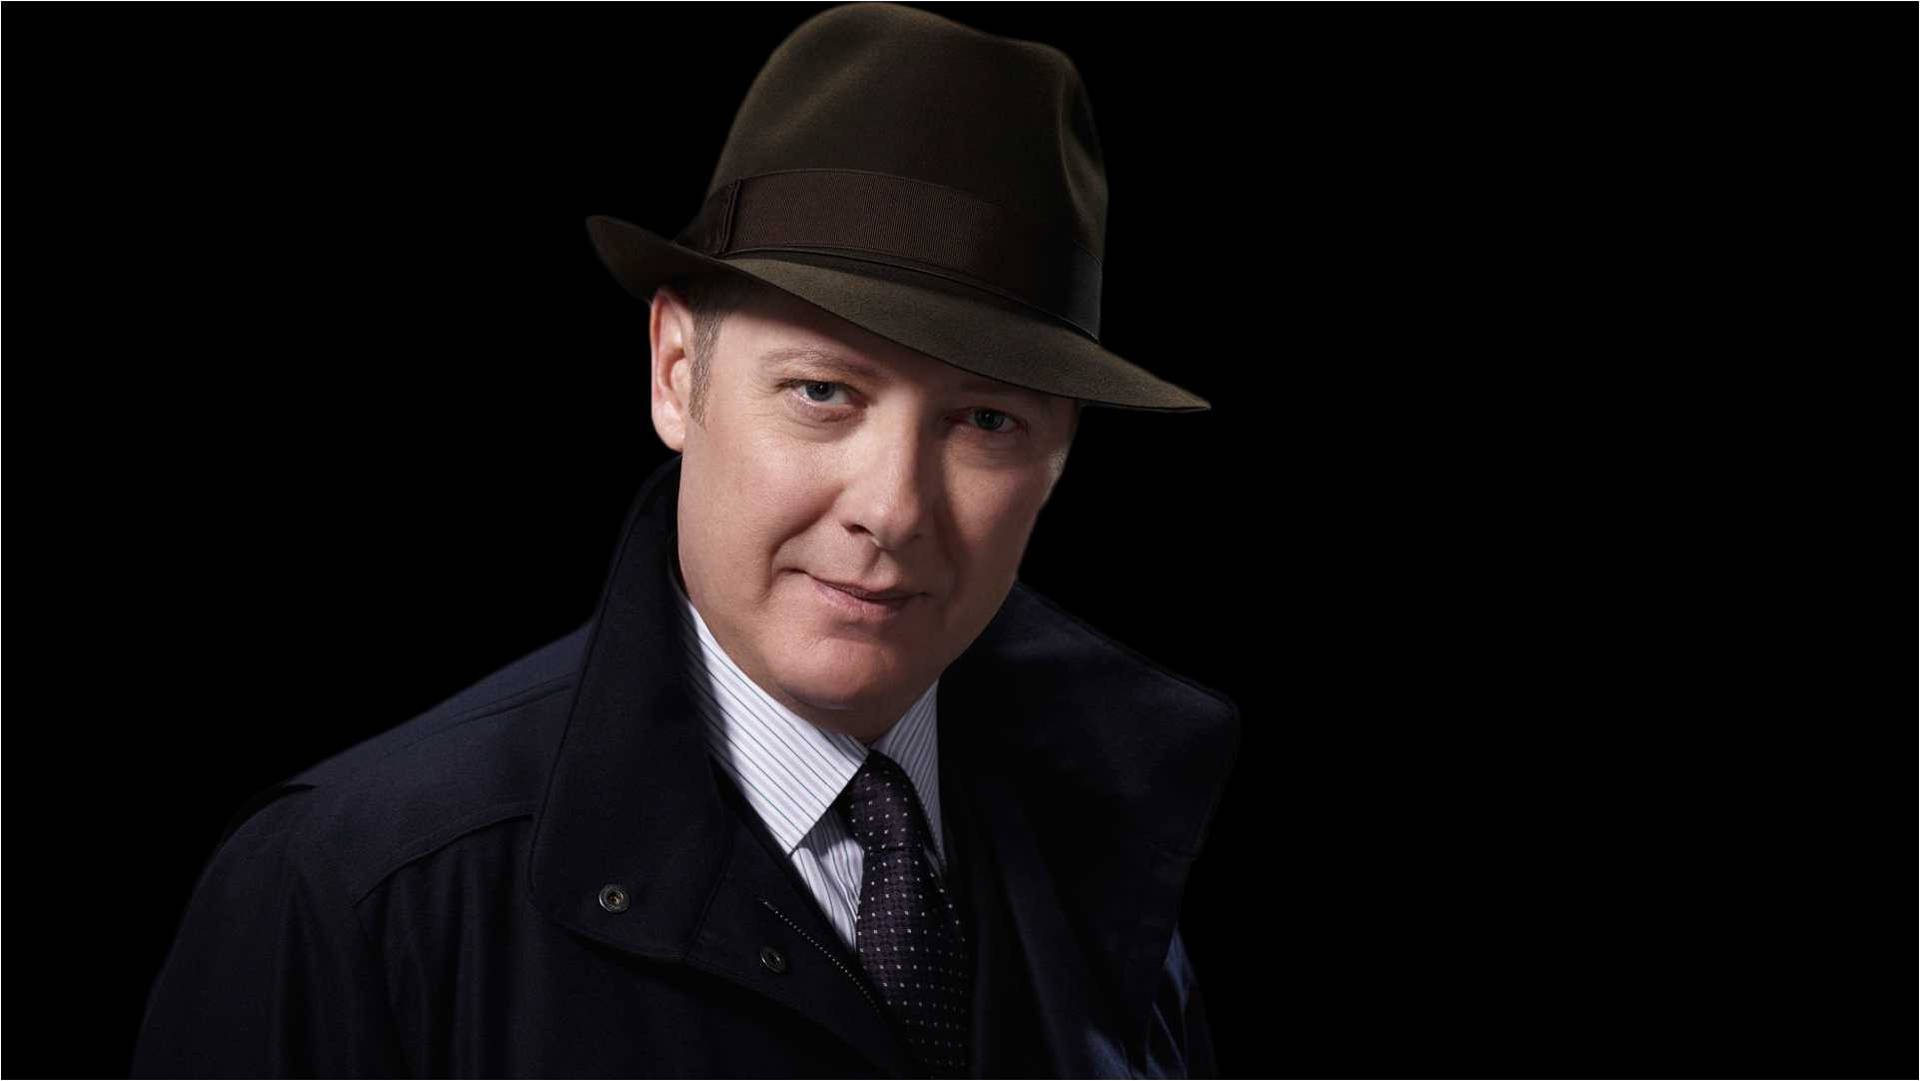 Raymond Reddington Stands In The Shadows In The Blacklist. Background